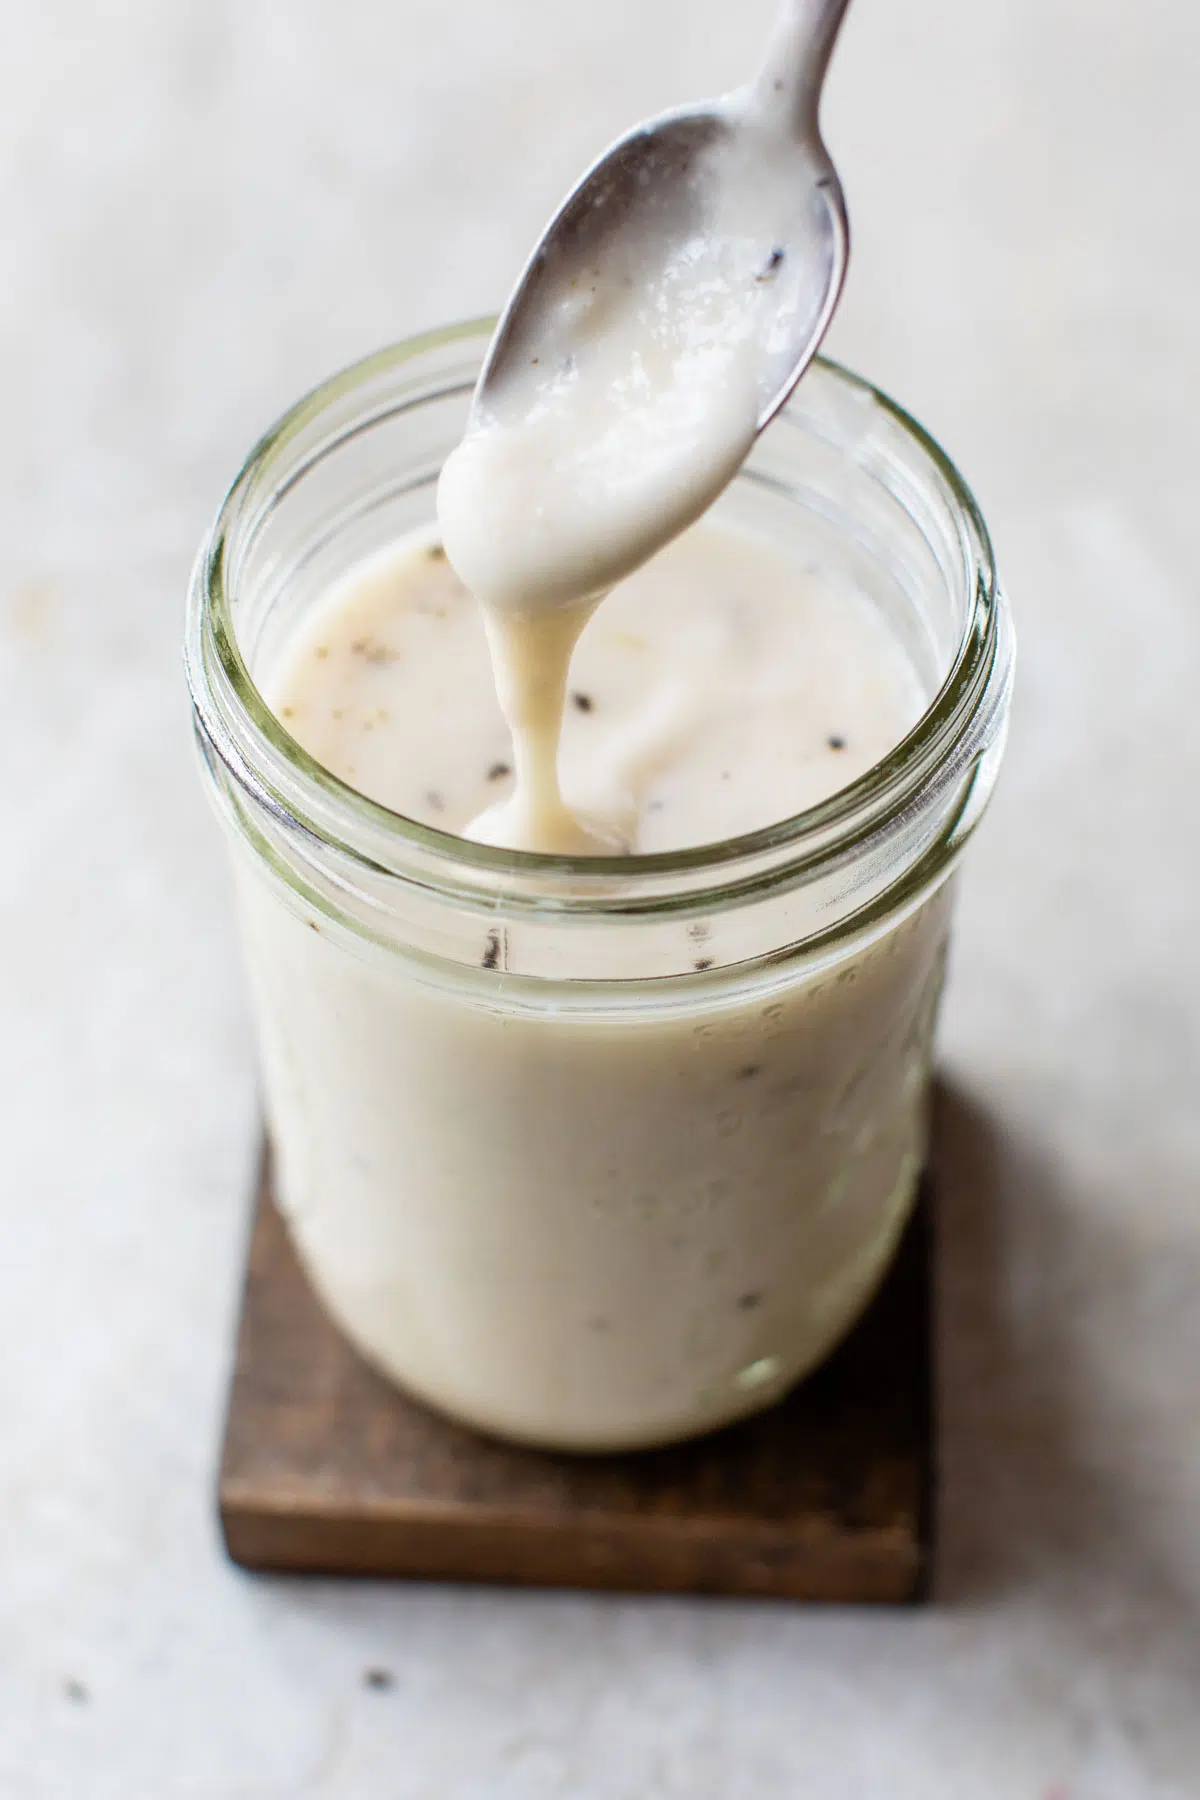 alfredo sauce in a glass jar with a spoon dipping in it